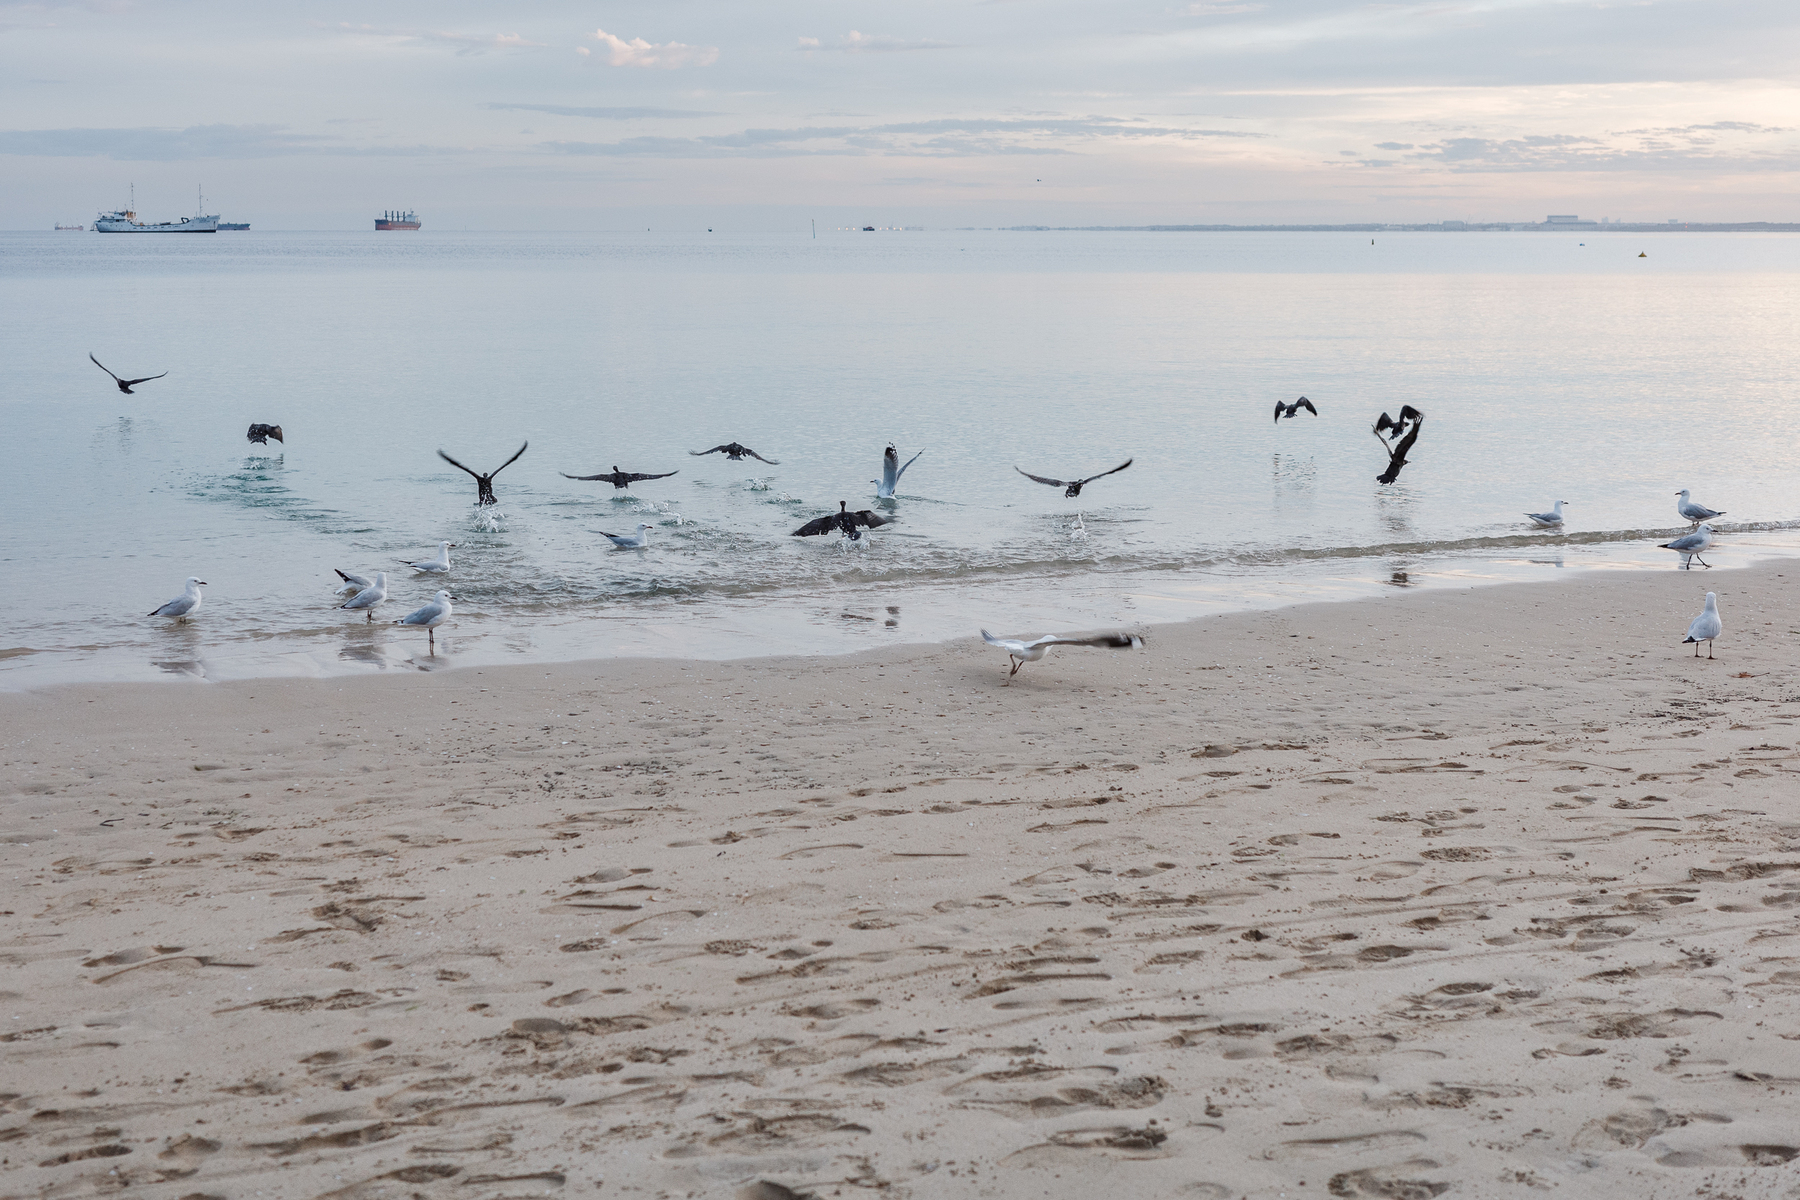 Auto-generated description: Seagulls are flying above and standing on a sandy beach with a calm ocean and ships on the horizon in the background.